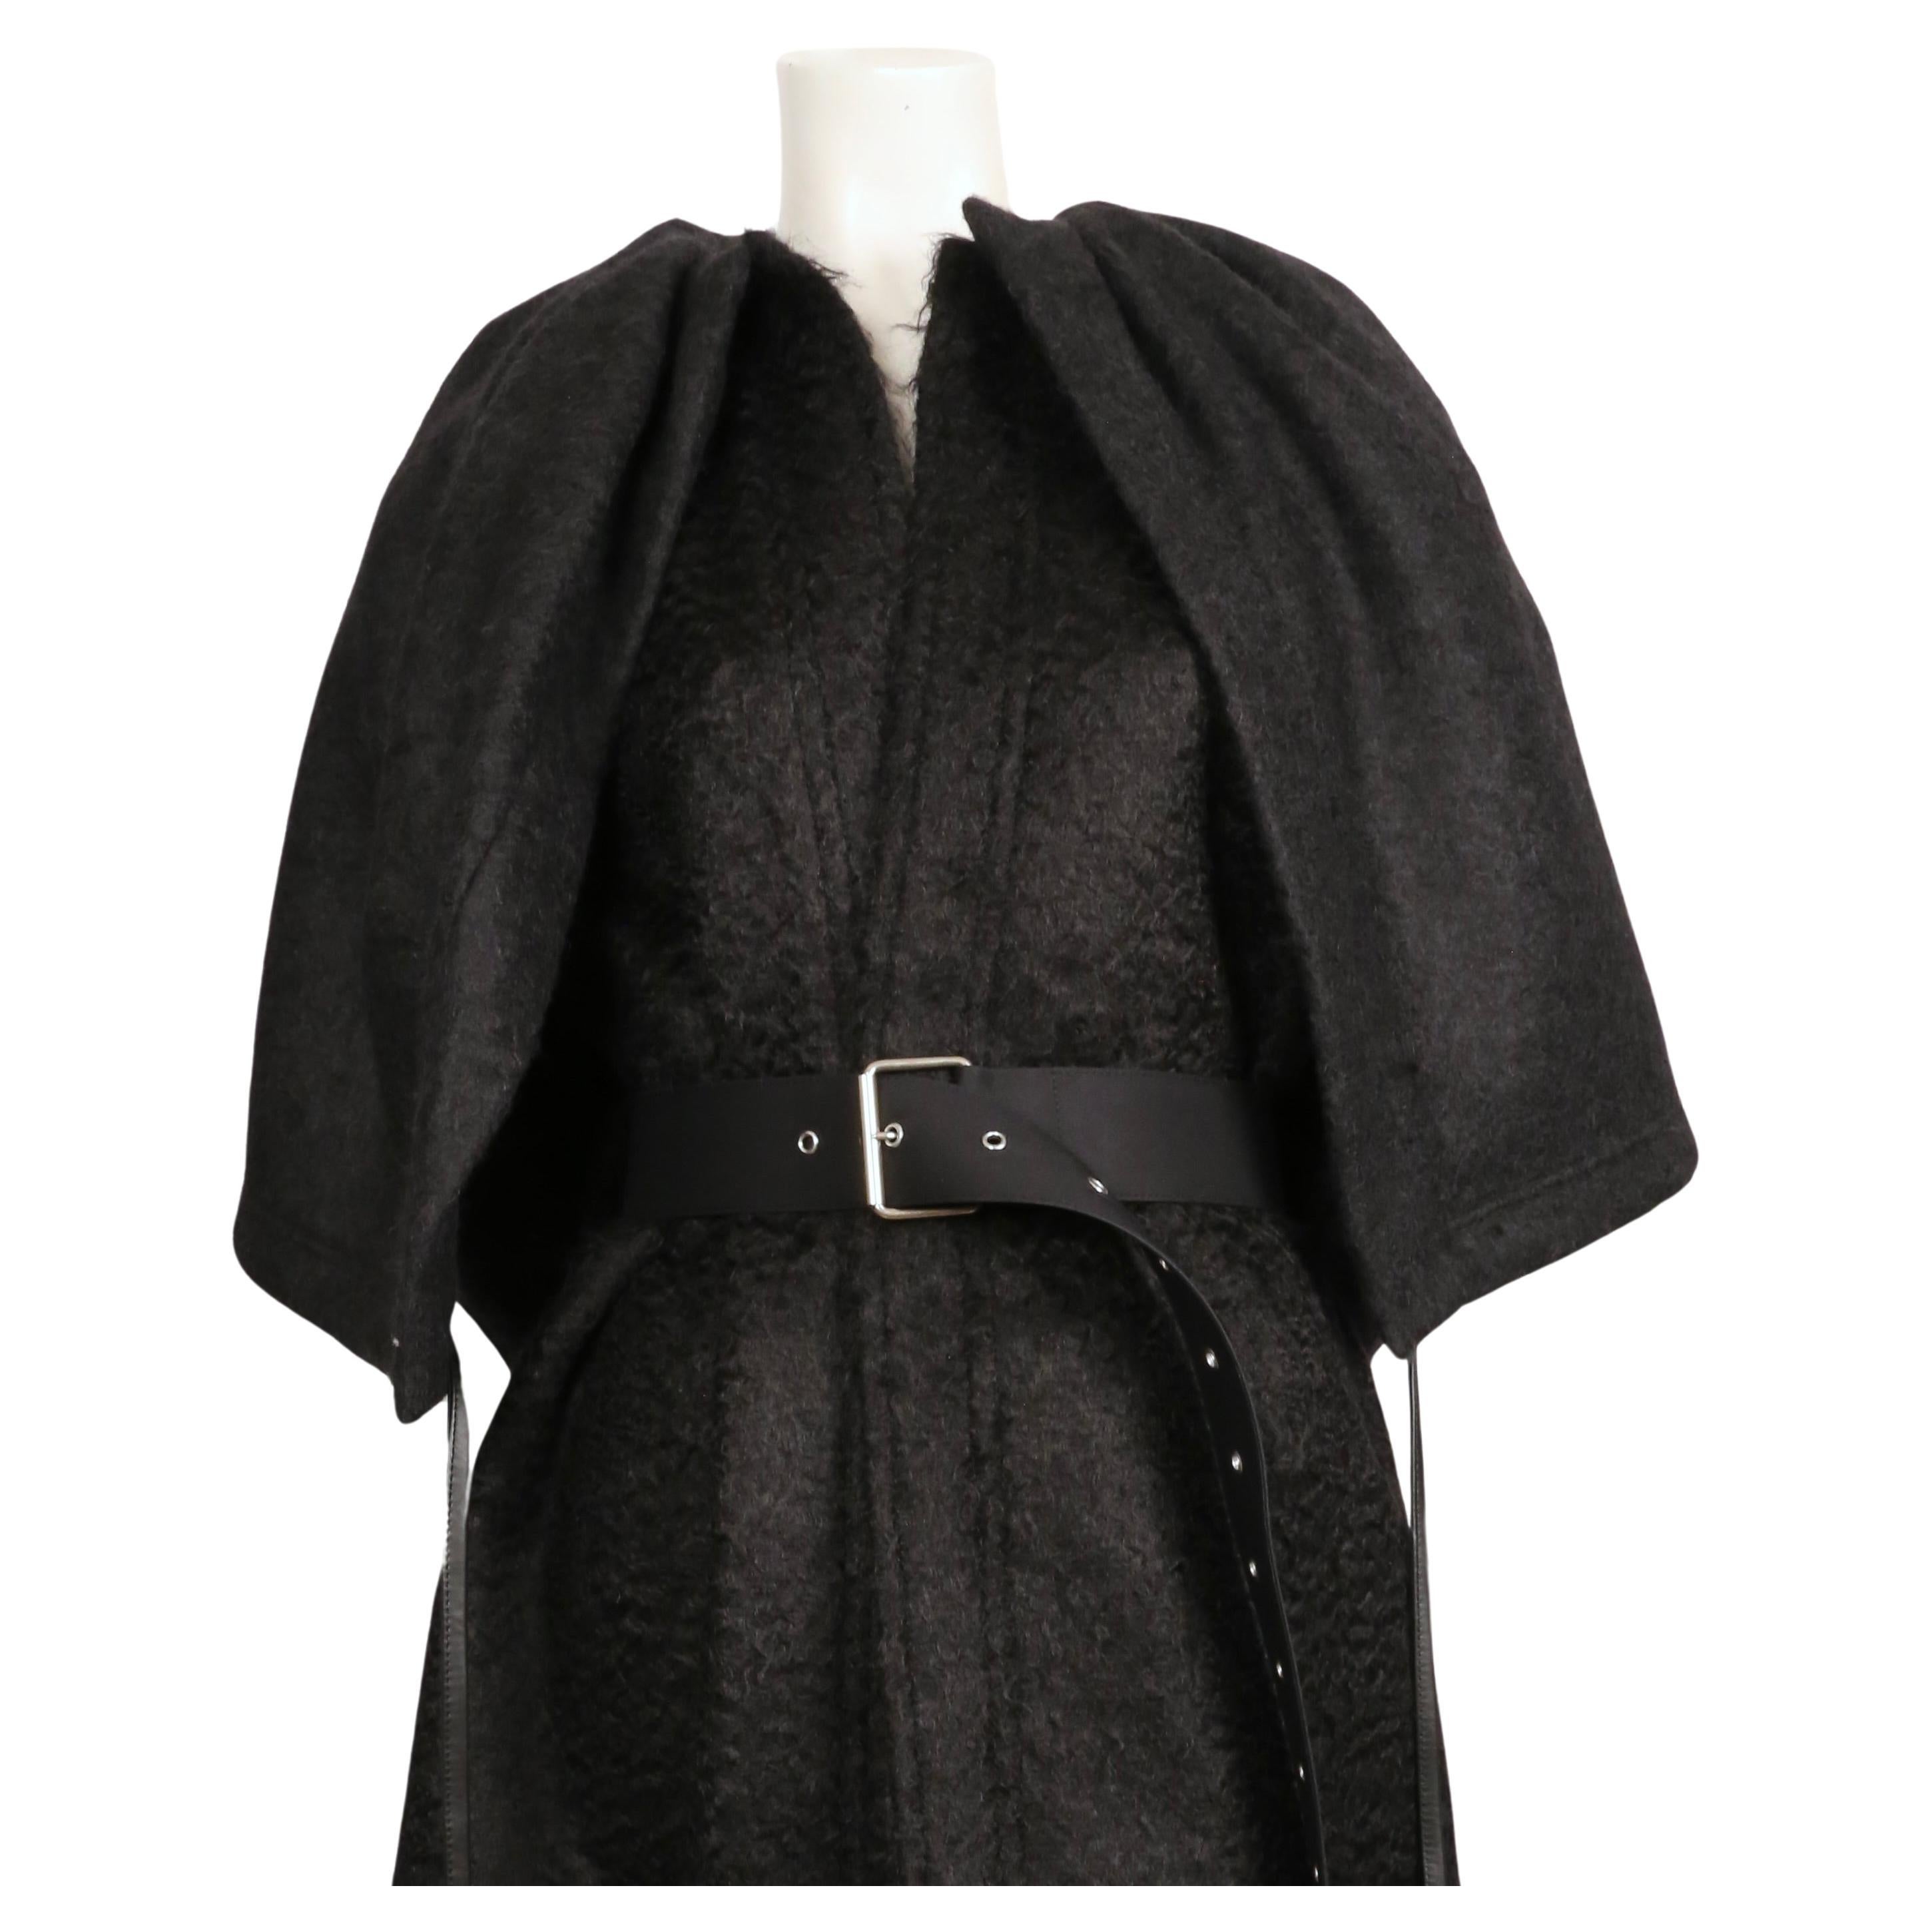 Very rare, Jet-black, fuzzy mohair wool coat with attached capelet and extra long belt designed by Phoebe Philo for Celine exactly as seen on the final runway look for fall of 2016.  French size 38. Approximate measurements: dropped shoulder 18